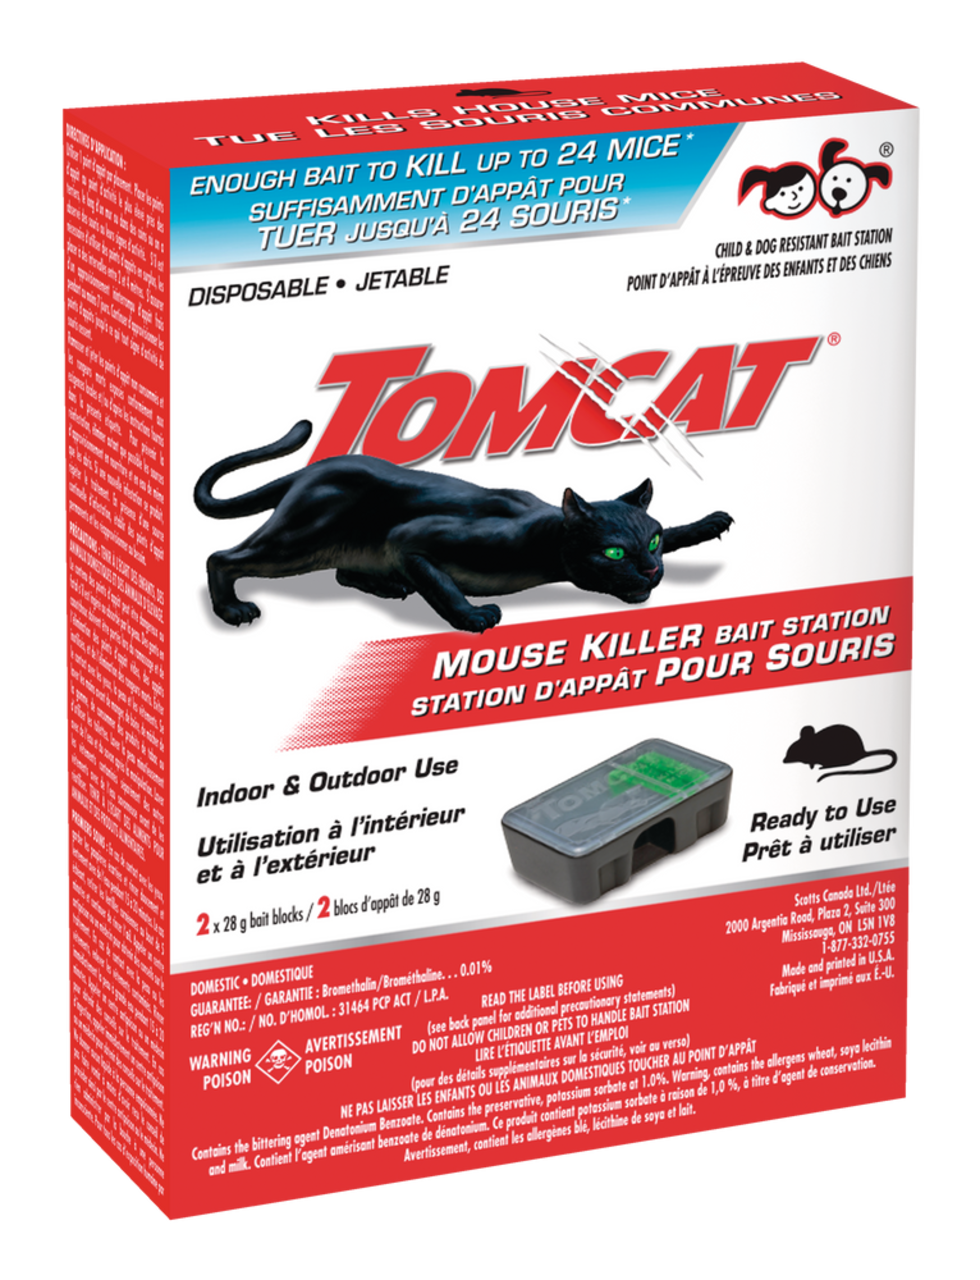 Tomcat Indoor/Outdoor Disposable Mouse Killer Bait Station, Child